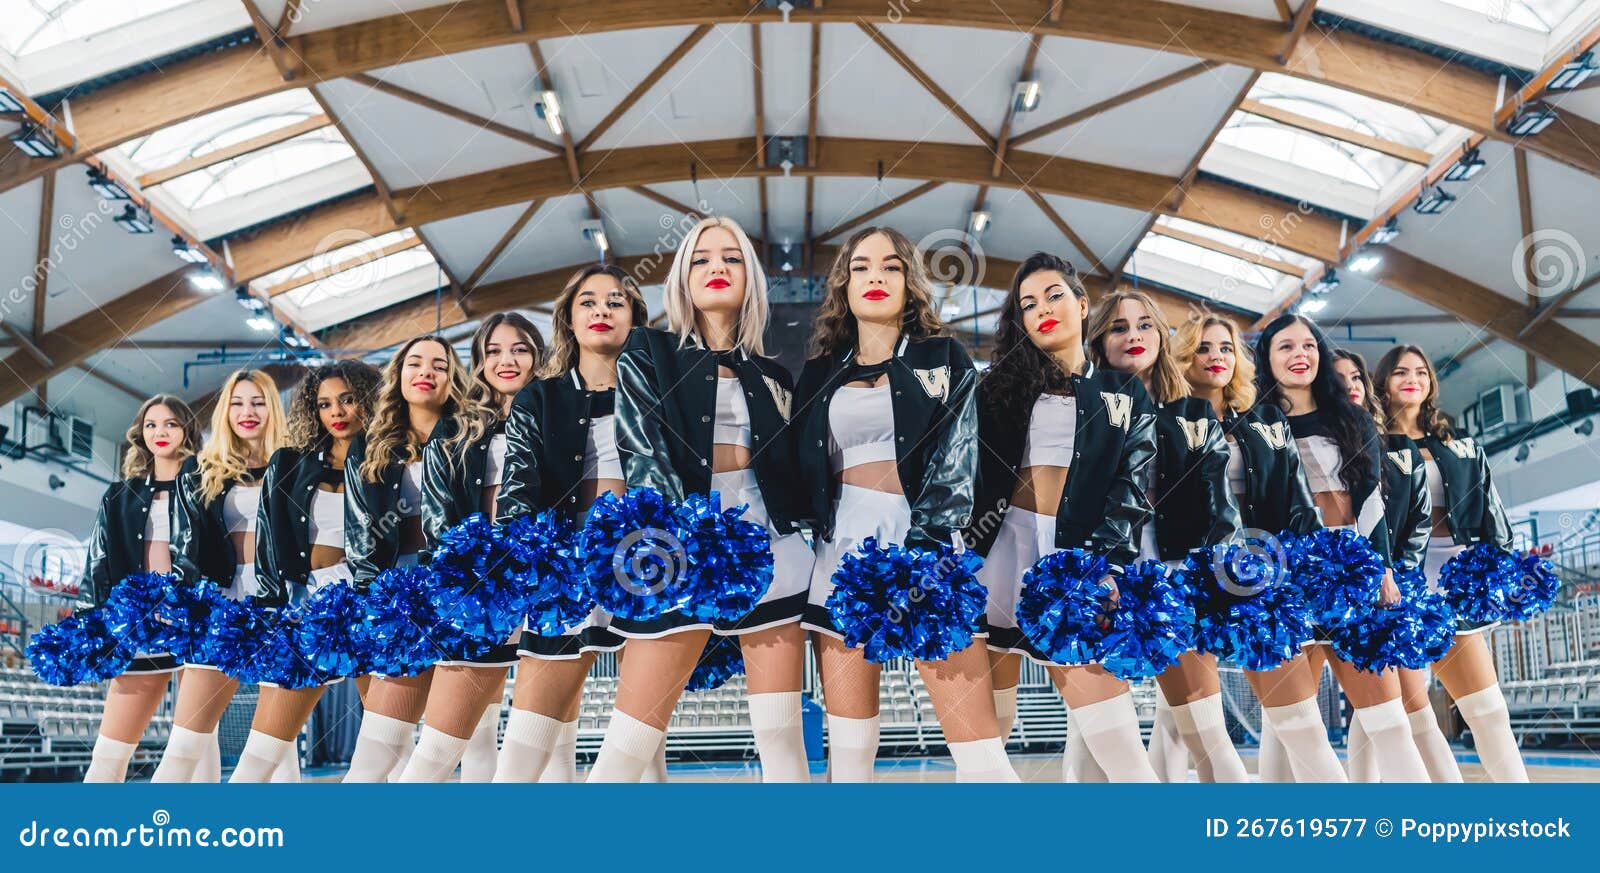 Three Cheerleaders In Blue And White Uniform And Pompoms Stock